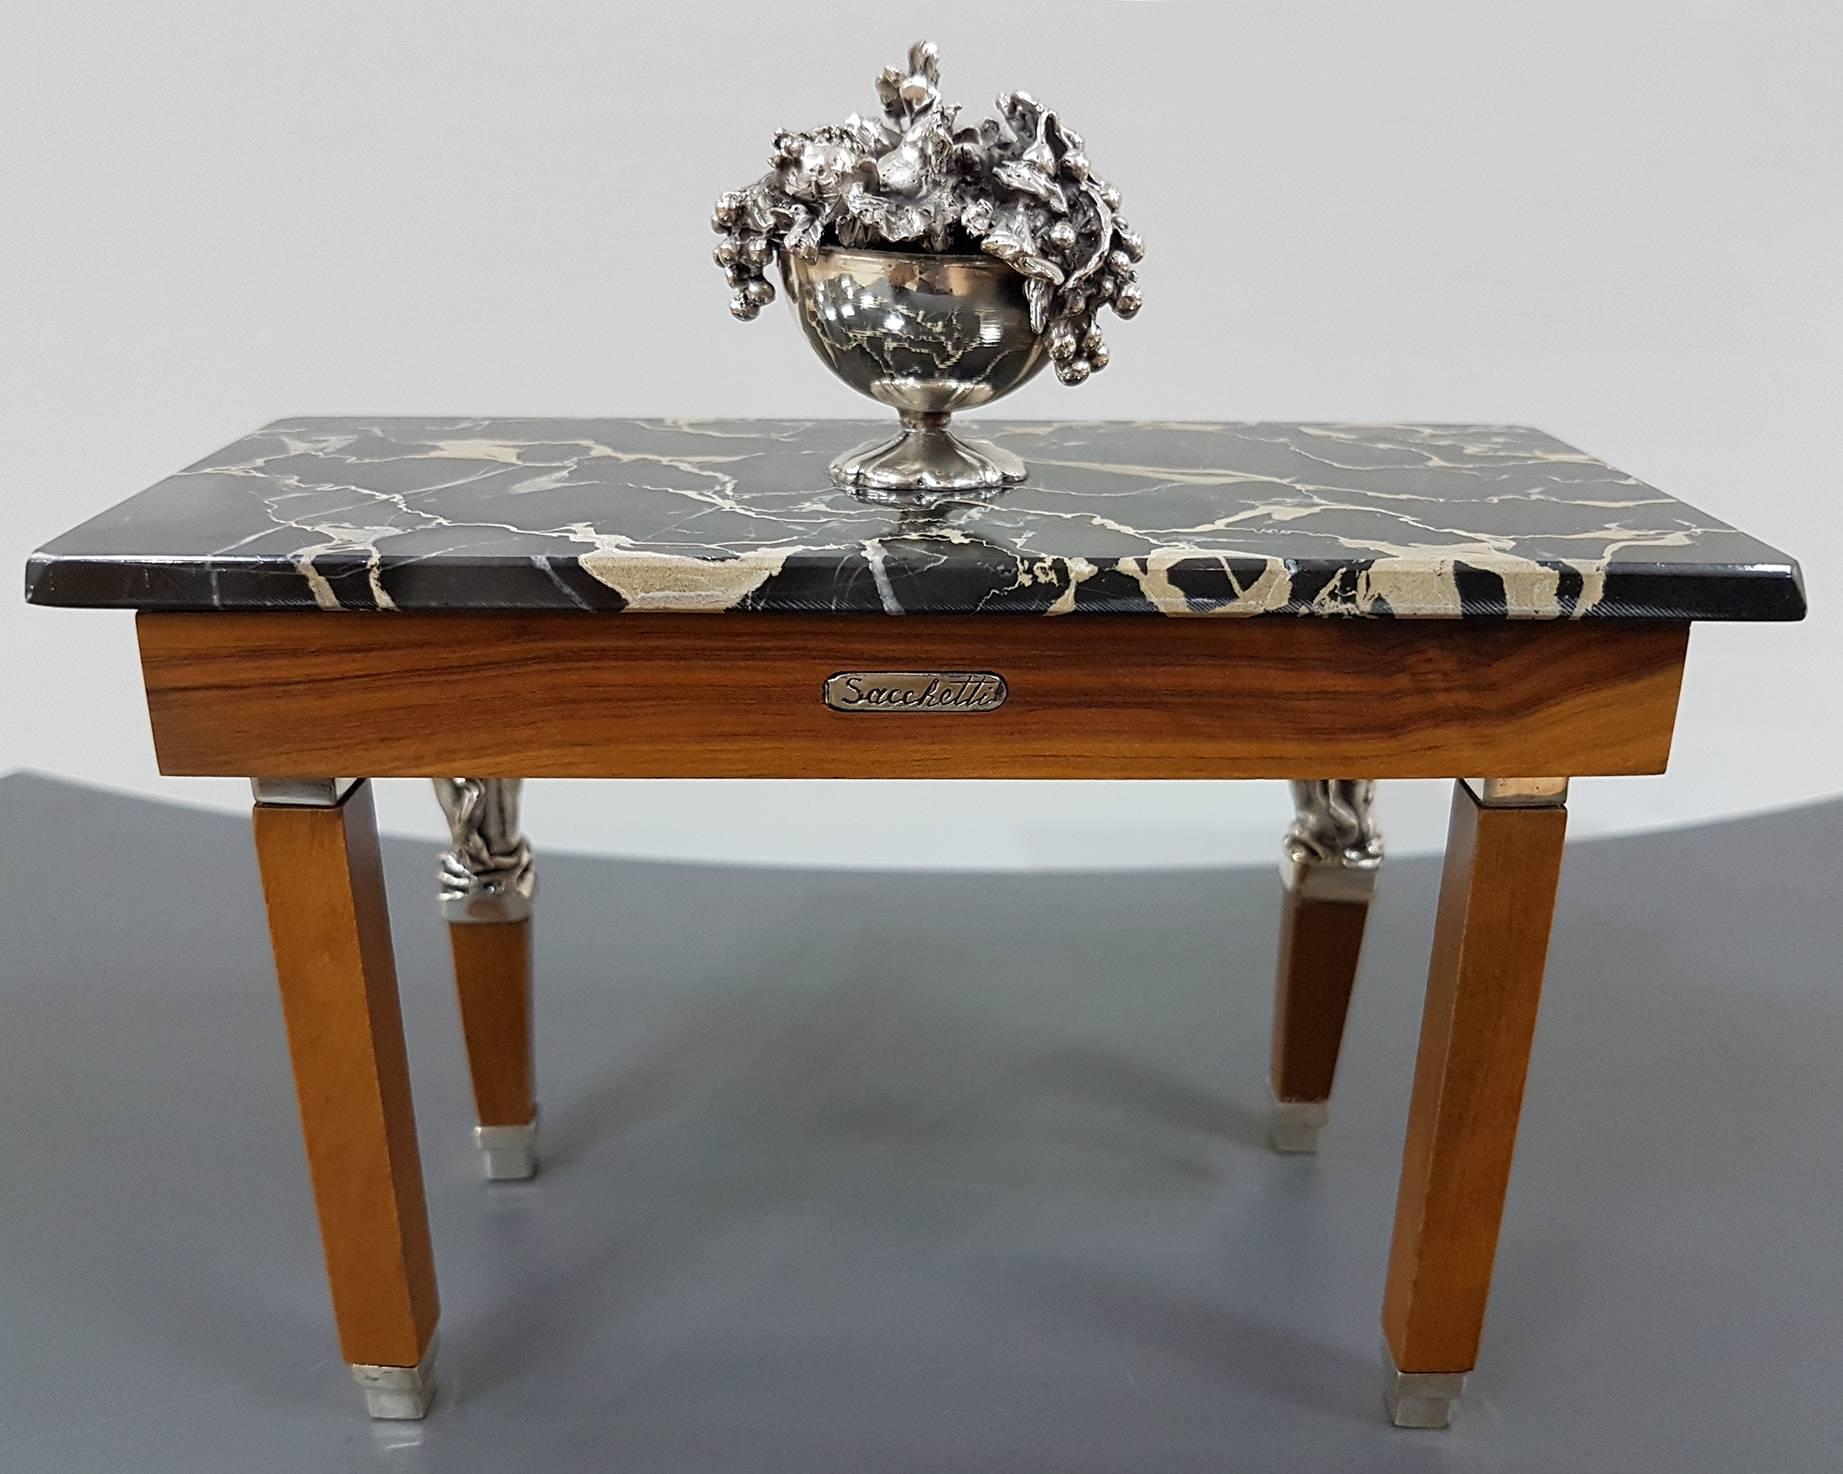 Late 20th Century 20th Century Italian Sterling Silver Miniature pr. of Tables by Sacchetti For Sale